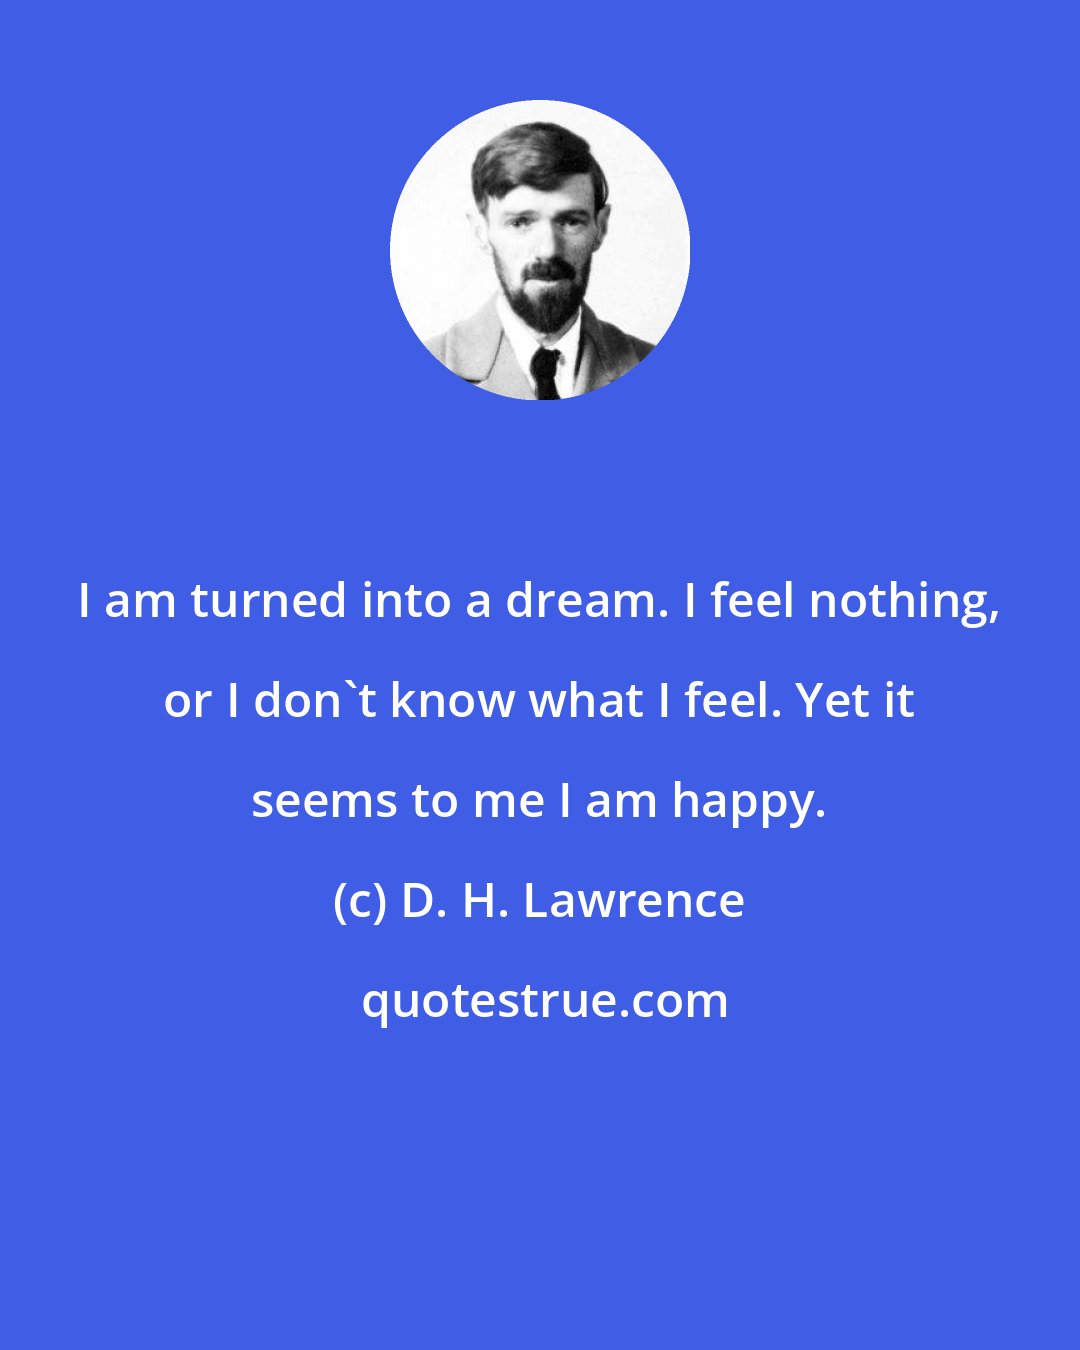 D. H. Lawrence: I am turned into a dream. I feel nothing, or I don't know what I feel. Yet it seems to me I am happy.